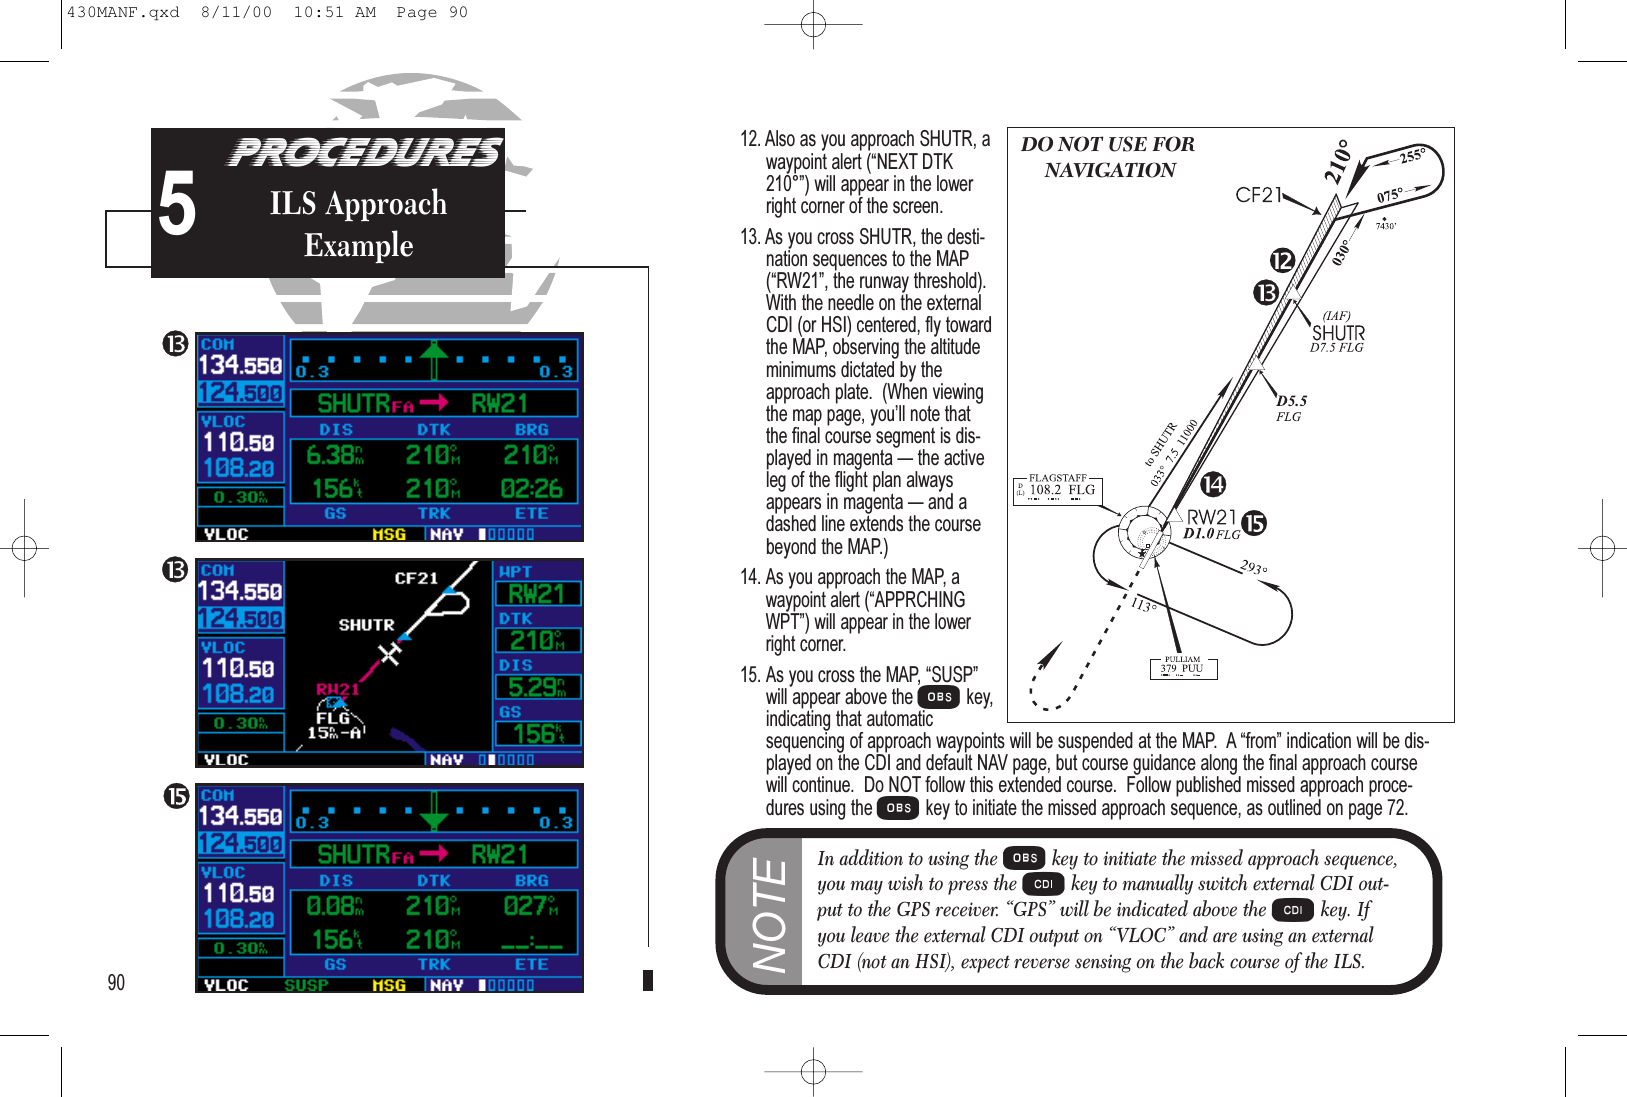 12. Also as you approach SHUTR, awaypoint alert (NEXT DTK210°) will appear in the lowerright corner of the screen.13. As you cross SHUTR, the desti-nation sequences to the MAP(RW21, the runway threshold).With the needle on the externalCDI (or HSI) centered, fly towardthe MAP, observing the altitudeminimums dictated by theapproach plate.  (When viewingthe map page, youll note thatthe final course segment is dis-played in magenta  the activeleg of the flight plan alwaysappears in magenta  and adashed line extends the coursebeyond the MAP.)14.As you approach the MAP, awaypoint alert (APPRCHINGWPT) will appear in the lowerright corner.15. As you cross the MAP, SUSPwill appear above the Okey,indicating that automaticsequencing of approach waypoints will be suspended at the MAP.  A from indication will be dis-played on the CDI and default NAV page, but course guidance along the final approach coursewill continue.  Do NOT follow this extended course.  Follow published missed approach proce-dures using the Okey to initiate the missed approach sequence, as outlined on page 72.90PROCEDURESILS ApproachExample5DO NOT USE FORNAVIGATIONNOTEIn addition to using the Okey to initiate the missed approach sequence,you may wish to press the Ckey to manually switch external CDI out-put to the GPS receiver. “GPS” will be indicated above the Ckey. Ifyou leave the external CDI output on “VLOC” and are using an externalCDI (not an HSI), expect reverse sensing on the back course of the ILS.430MANF.qxd  8/11/00  10:51 AM  Page 90